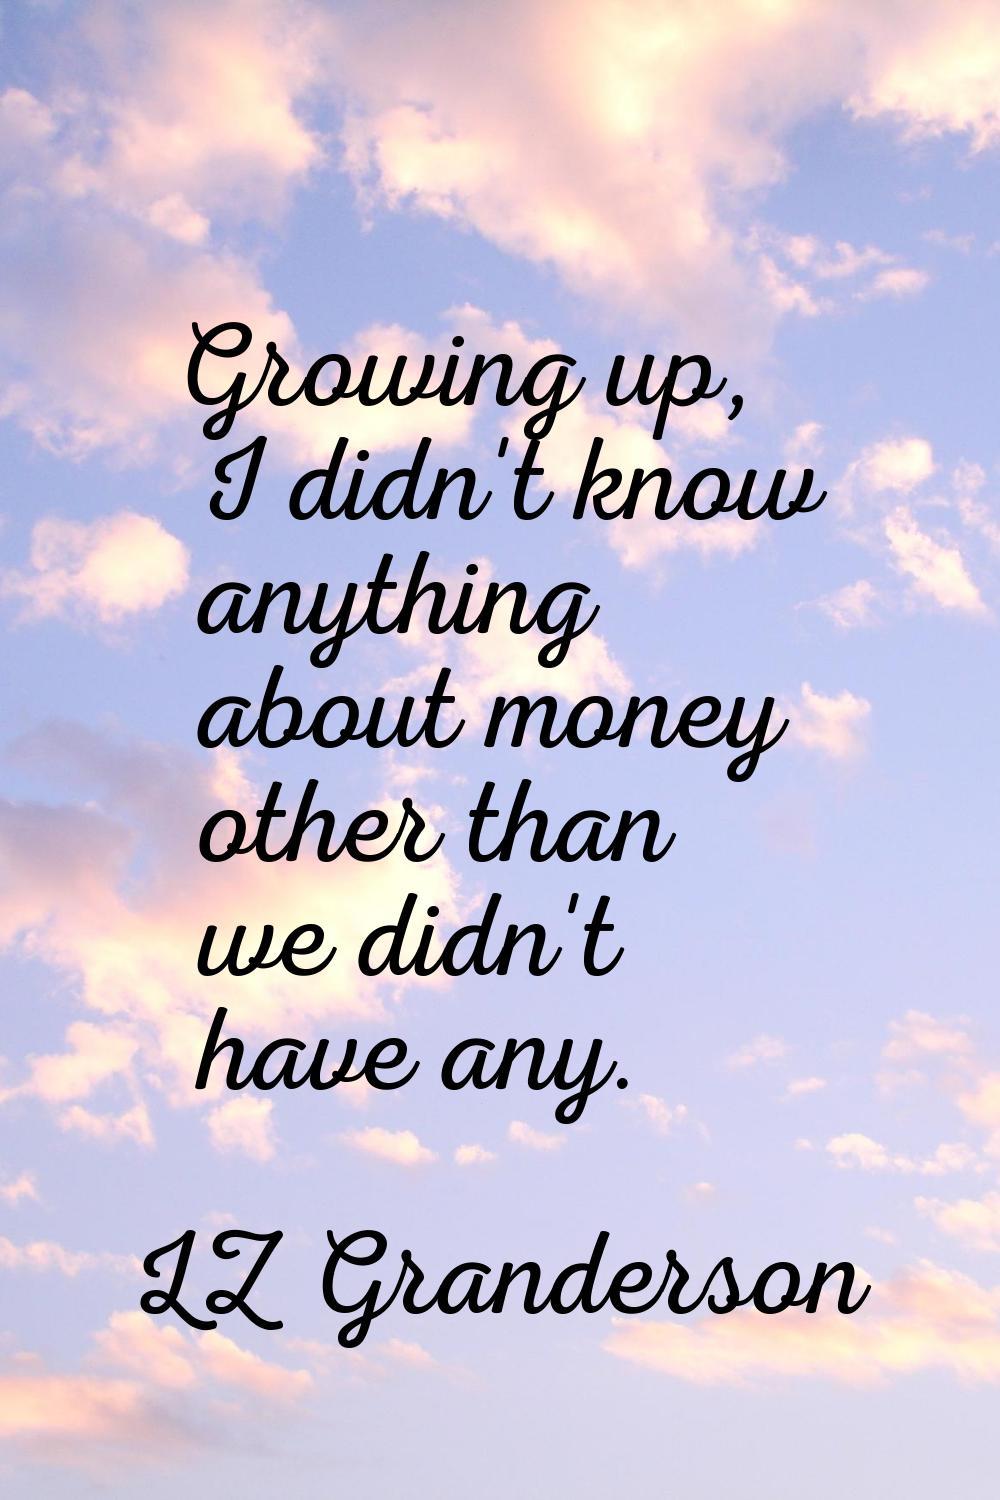 Growing up, I didn't know anything about money other than we didn't have any.